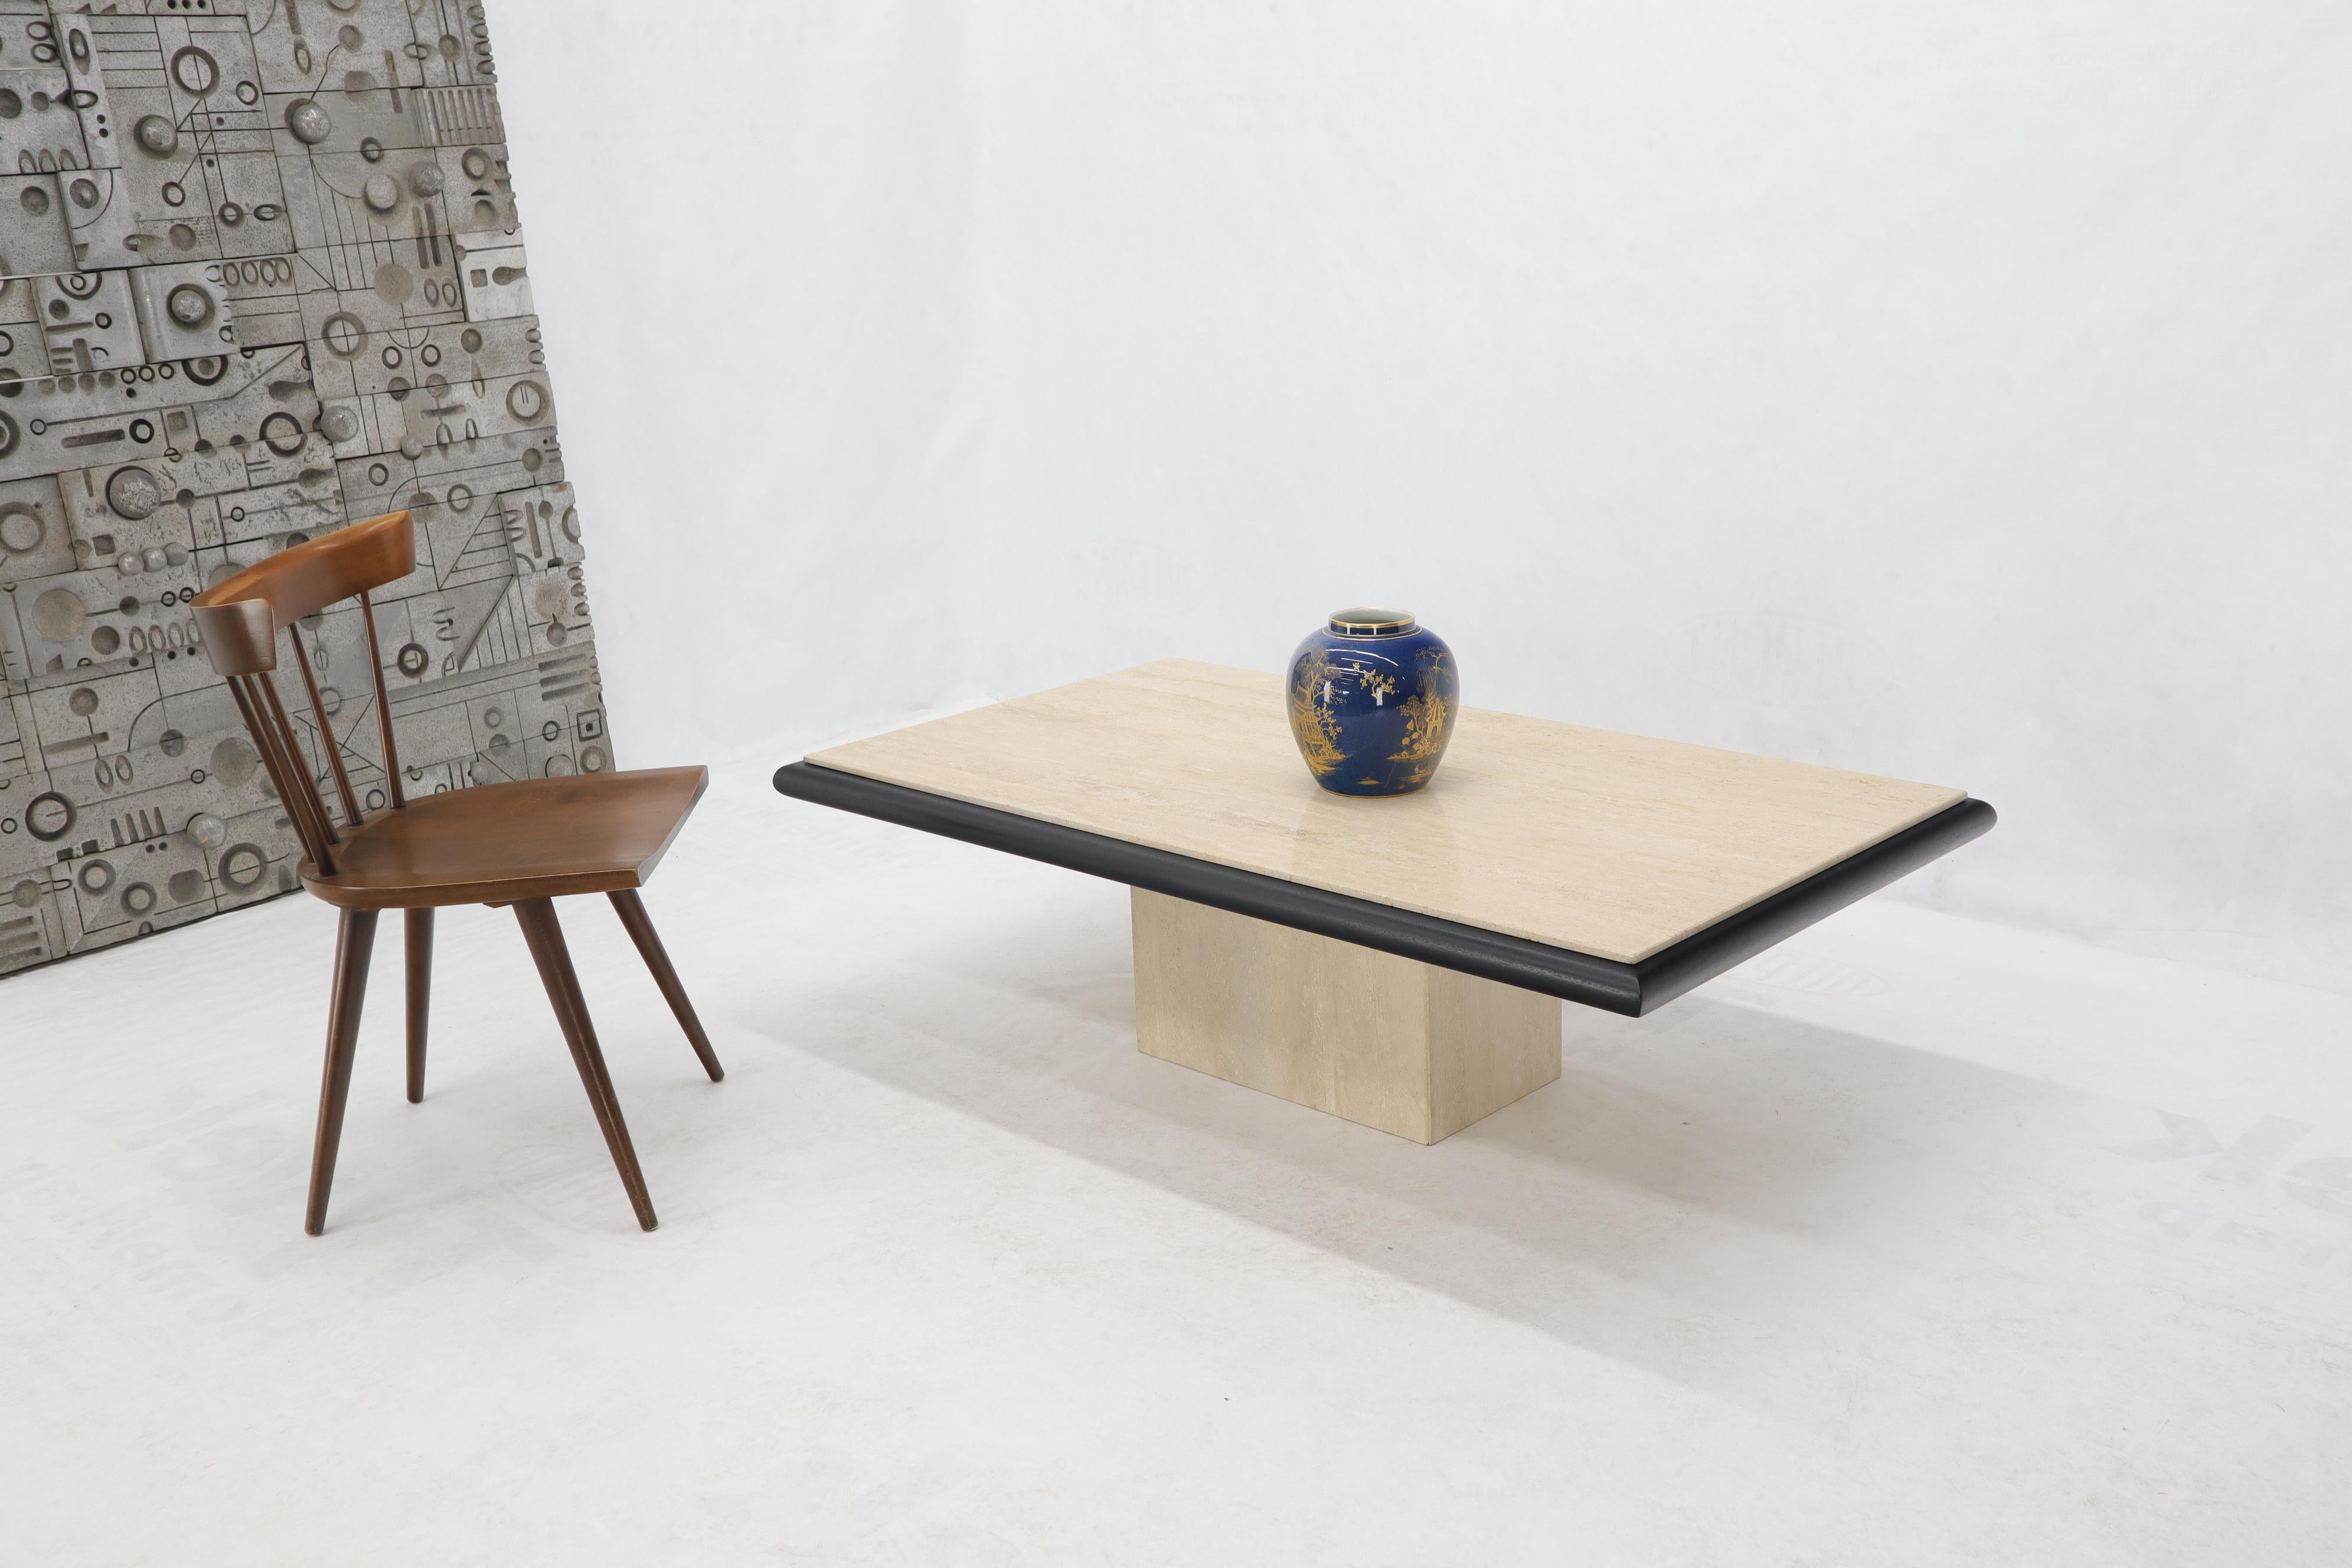 Midcentury Italian modern rectangular travertine coffee table with black lacquer wood bezel or frame.